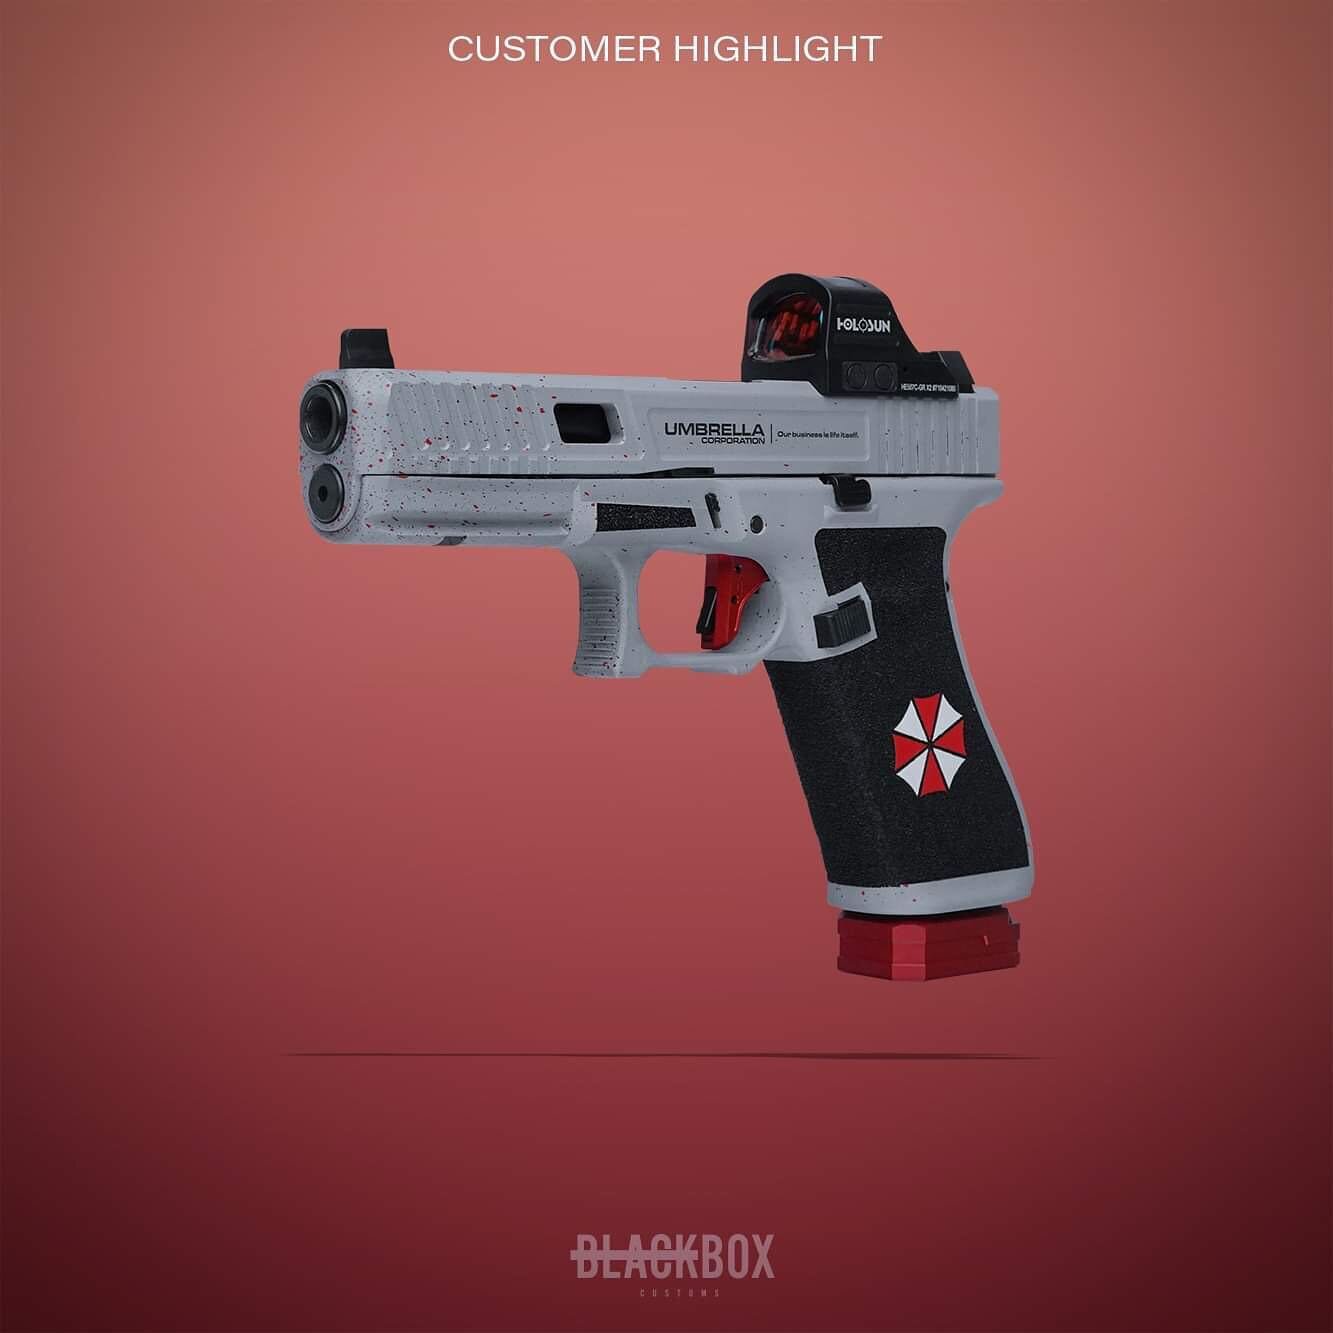 &ldquo;OUR BUSINESS IS LIFE ITSELF&rdquo;
 
Cerakote in Custom Blue-Silver, Bright White, and Crimson
NEO Slide Package and Optic Cut by Black Box Customs
507C Red Dot Optic by Holosun
Trigger Guard Undercut Combo and Accelerator Cut by Black Box Cus